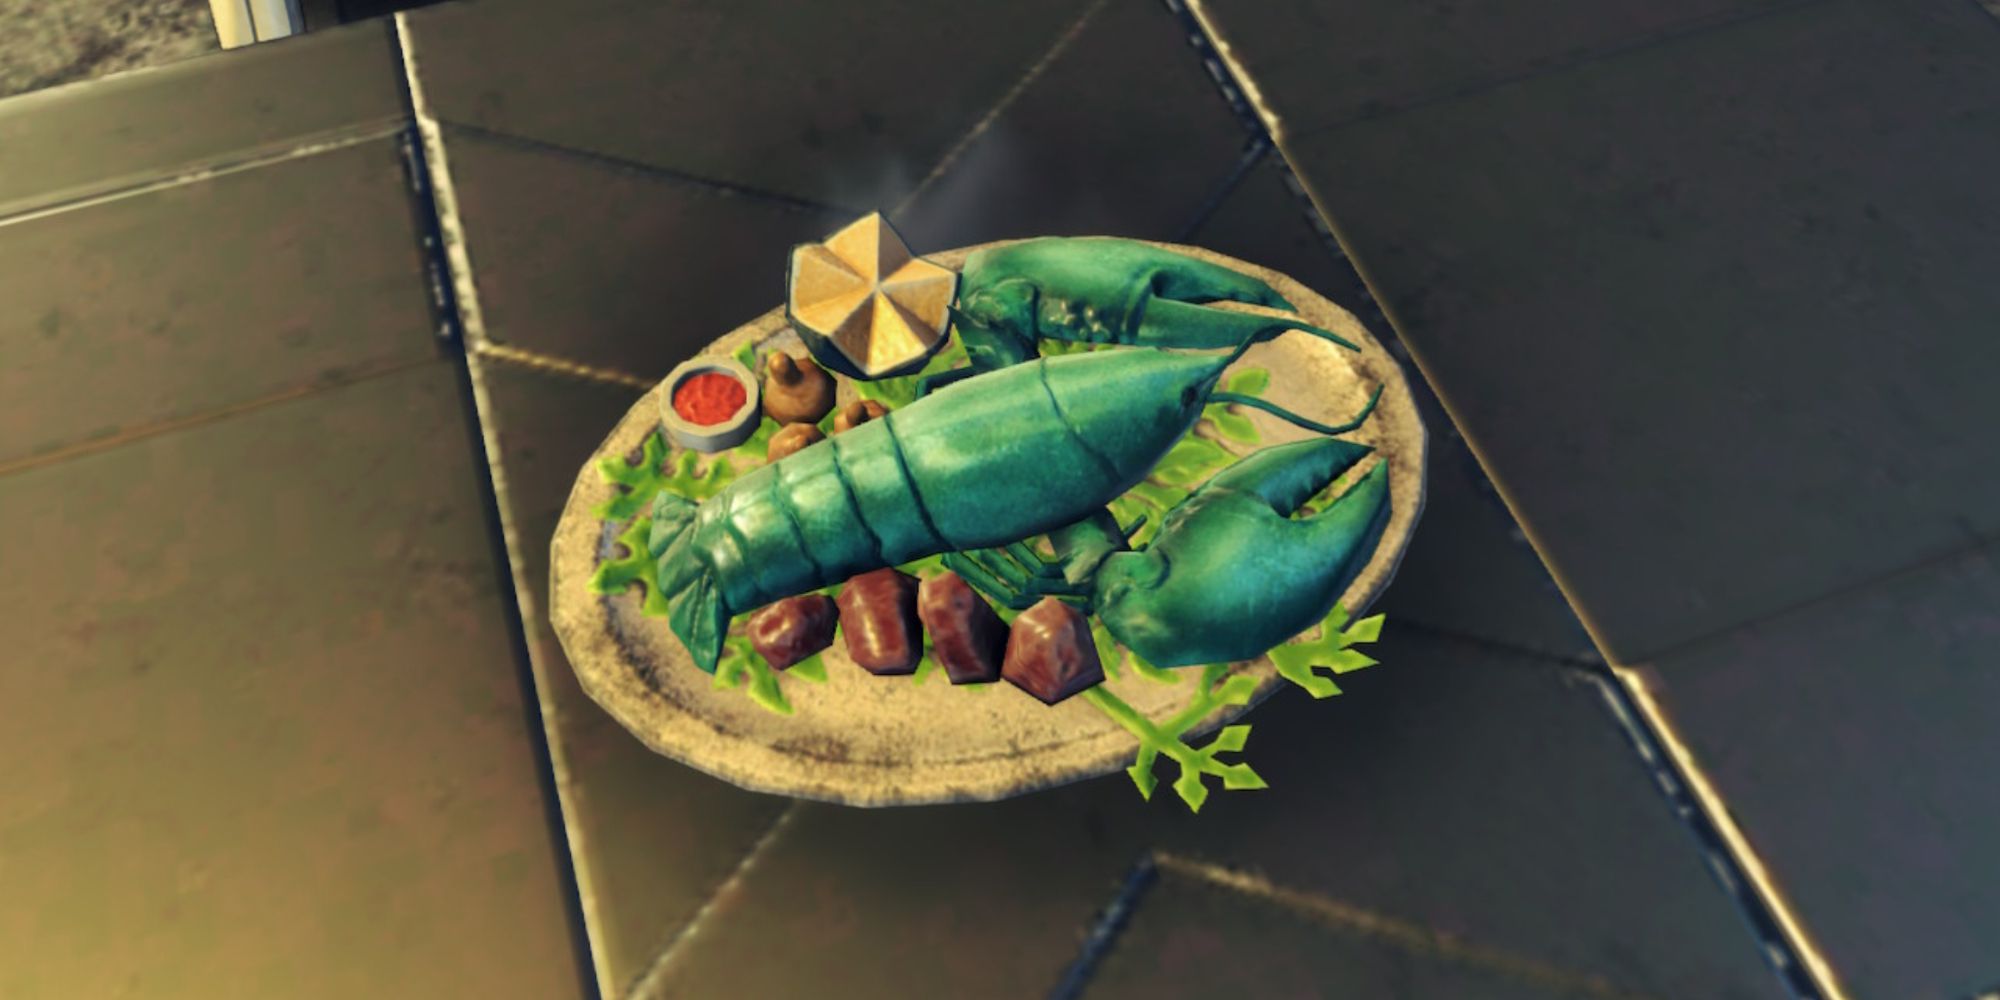 The Shiny-Briny Lobster Boil Meal in Xenoblade Chronicles 3